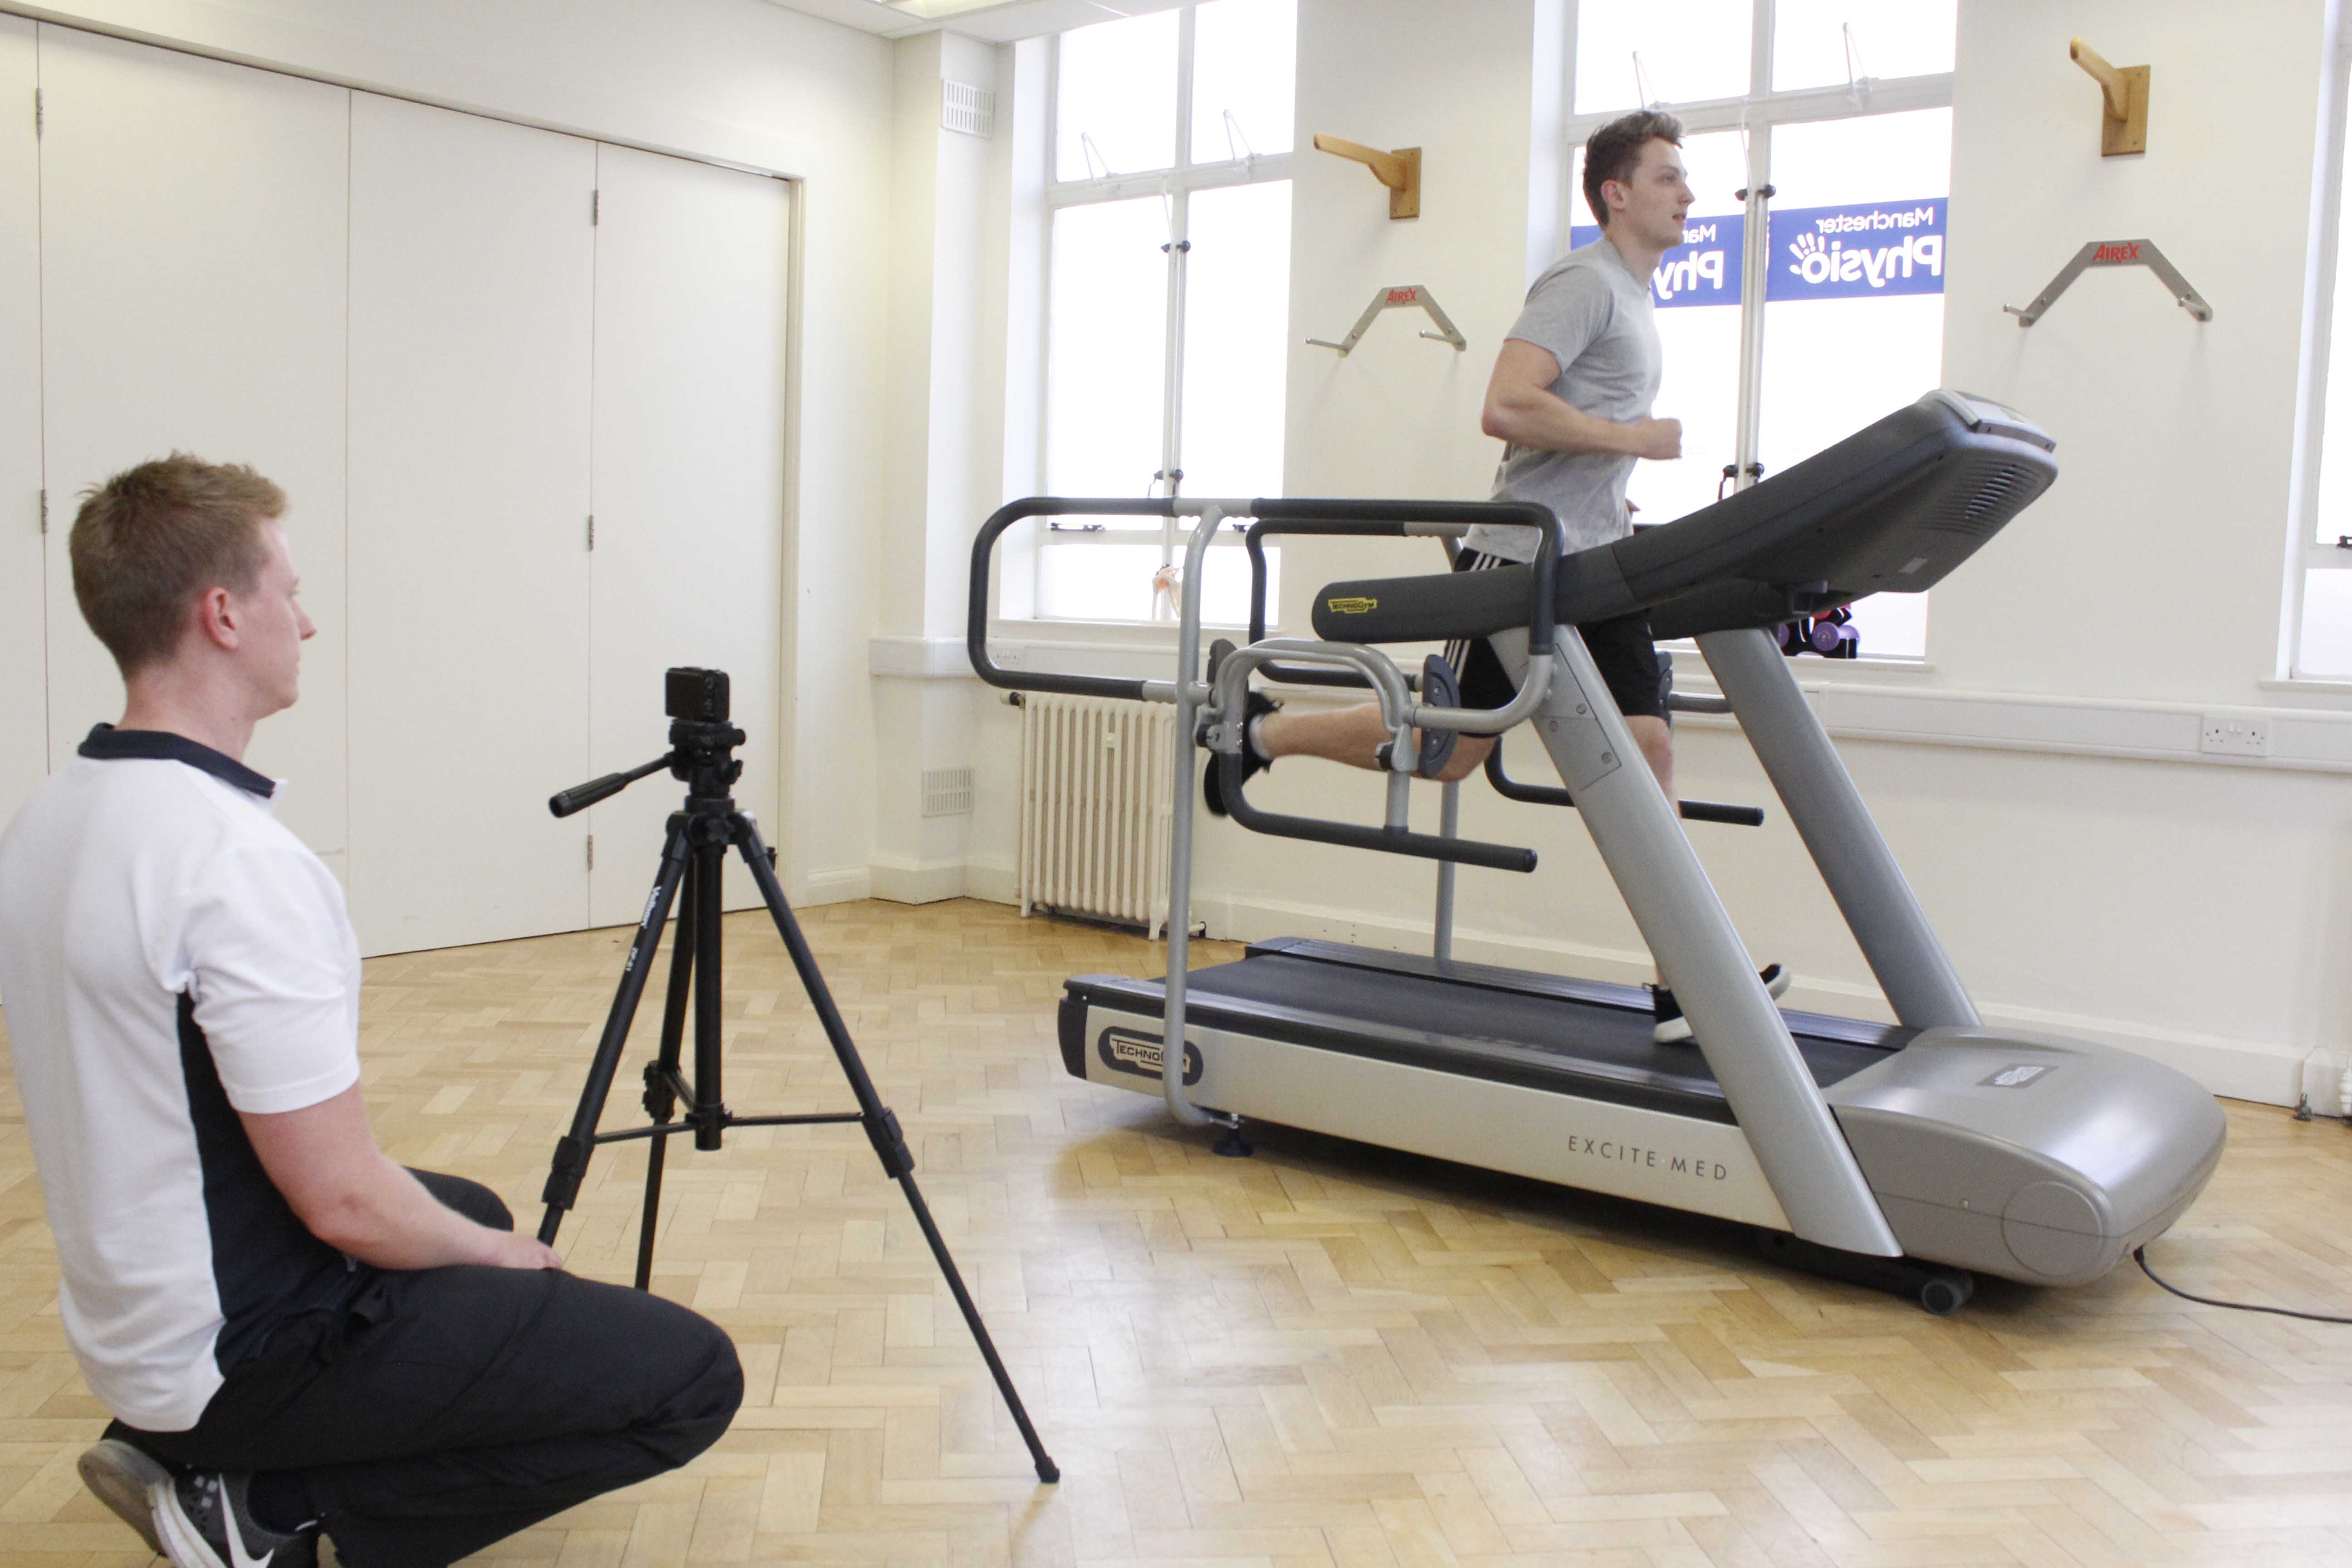 Specilaist physiotherapist conducting a biomechanical assessment of a client's gait pattern